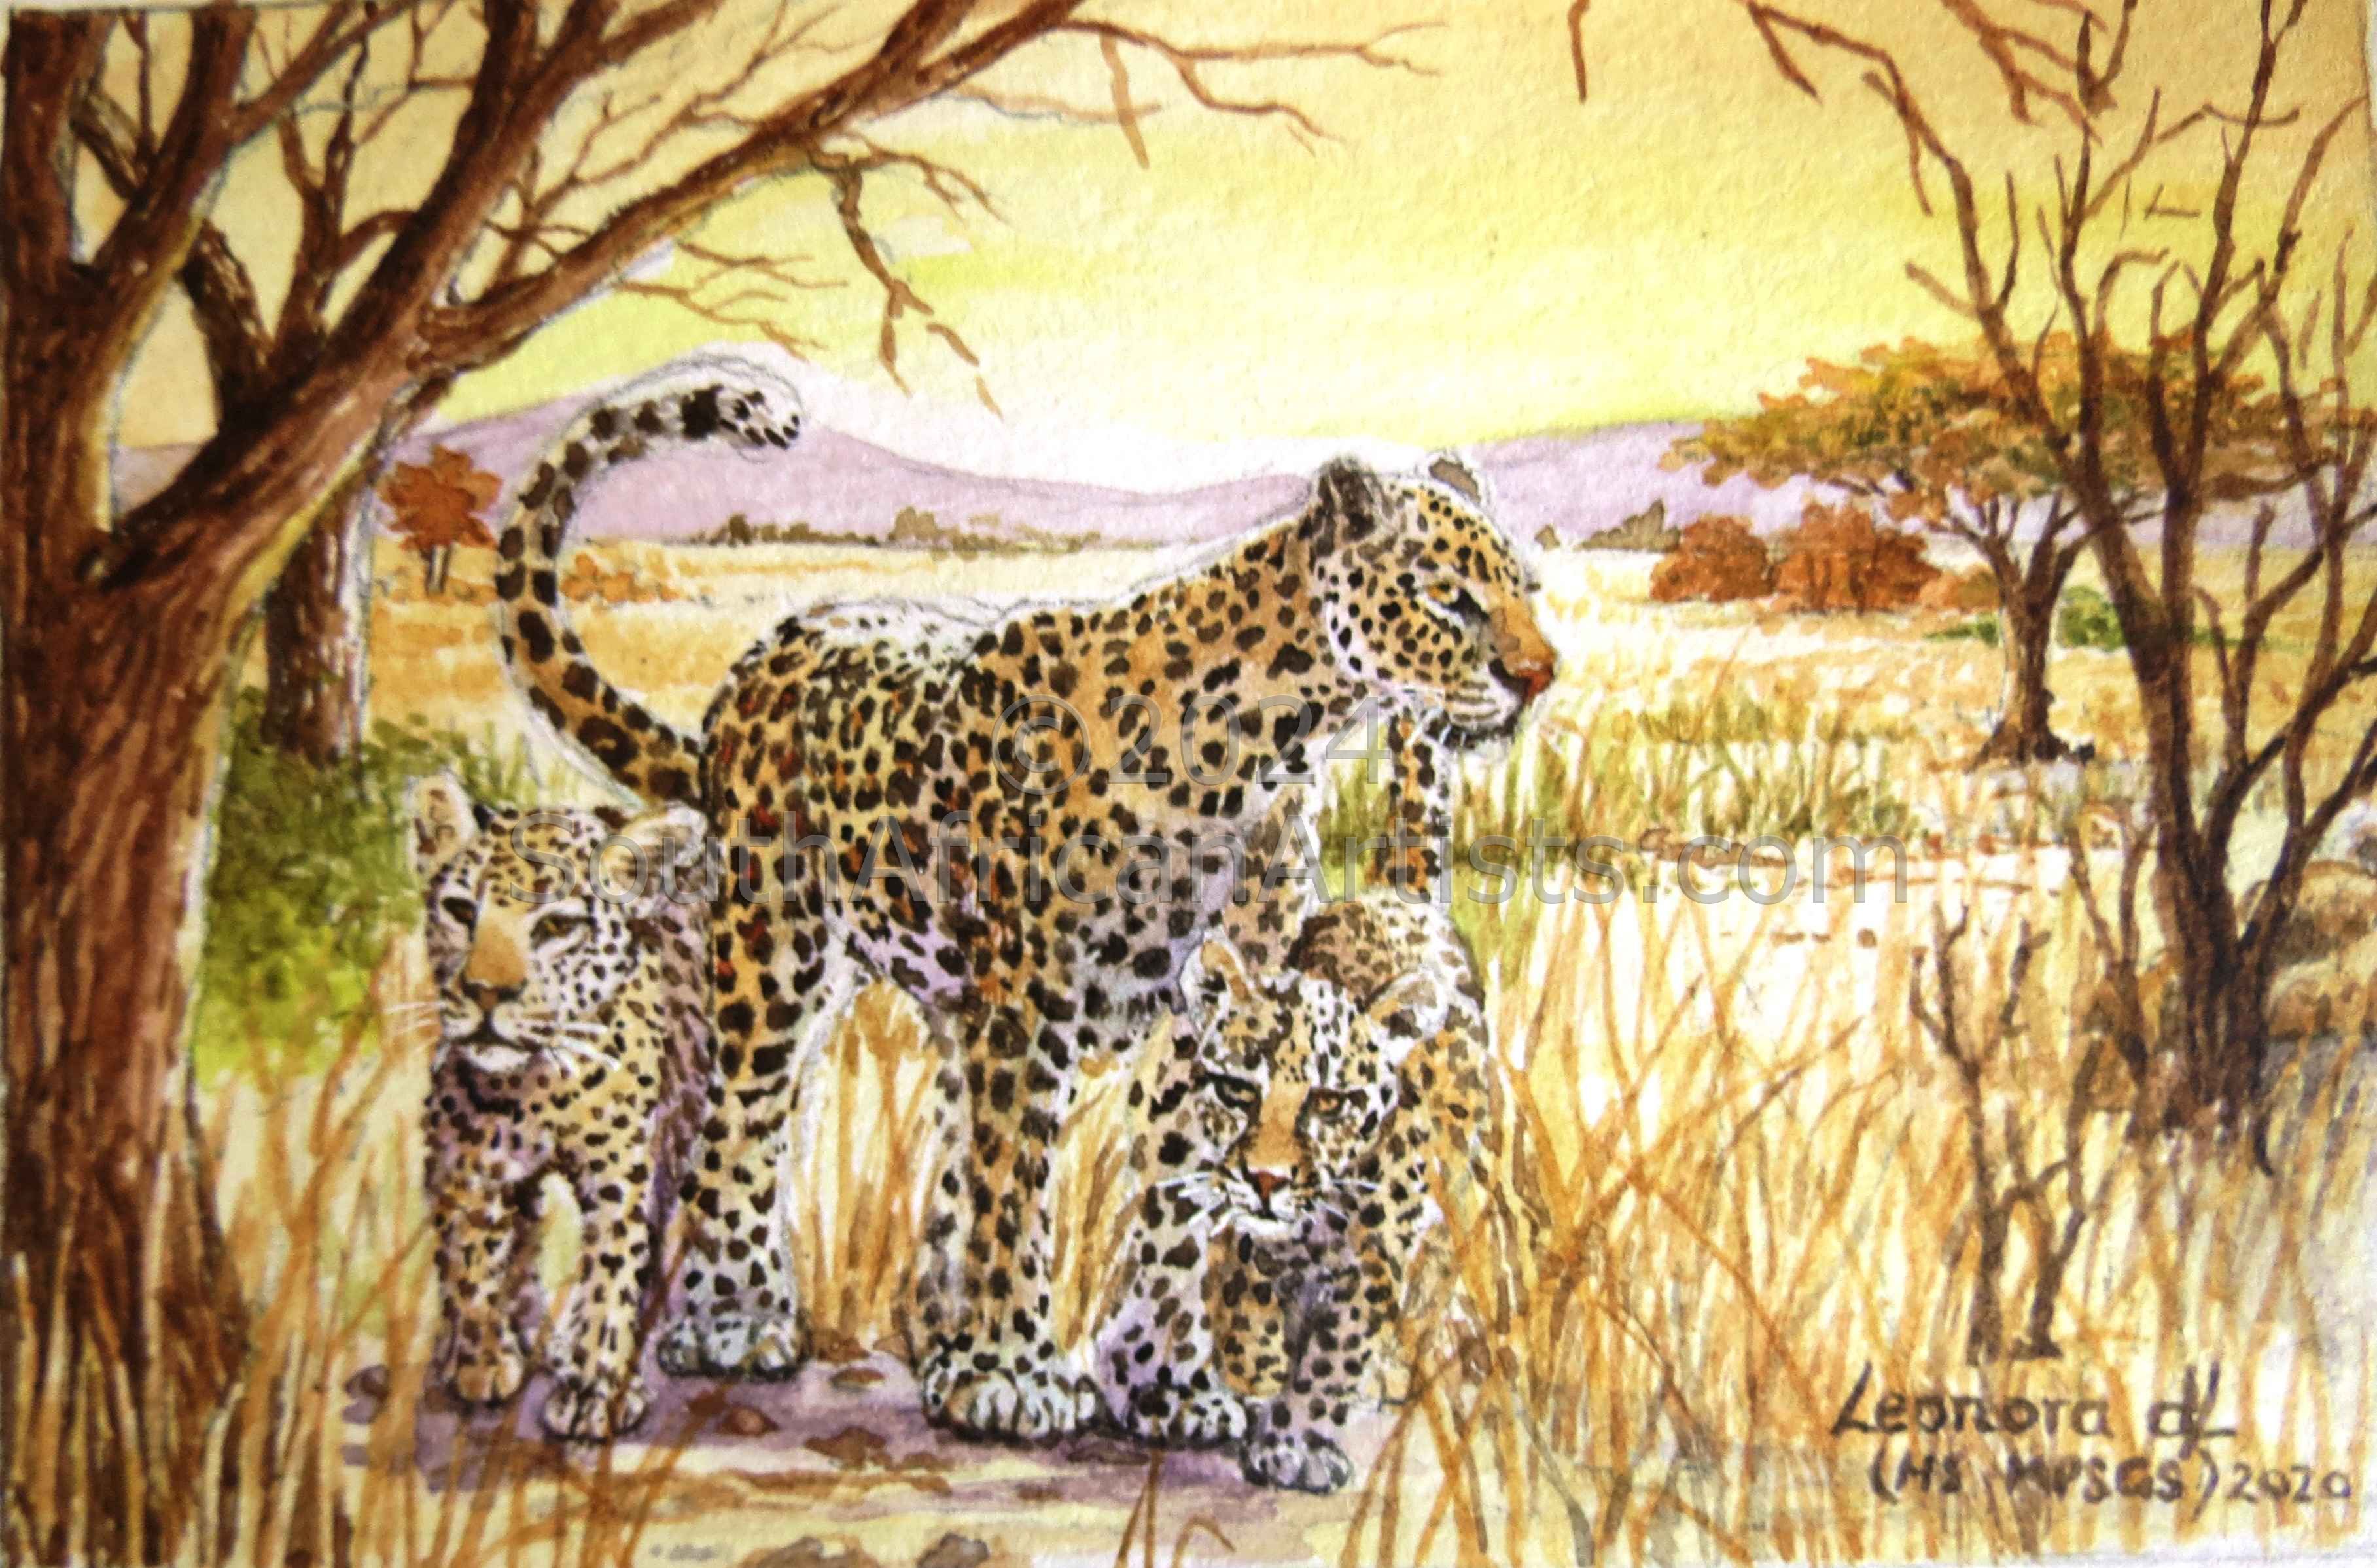 MINIATURE-Leopard and her cubs at Sunset